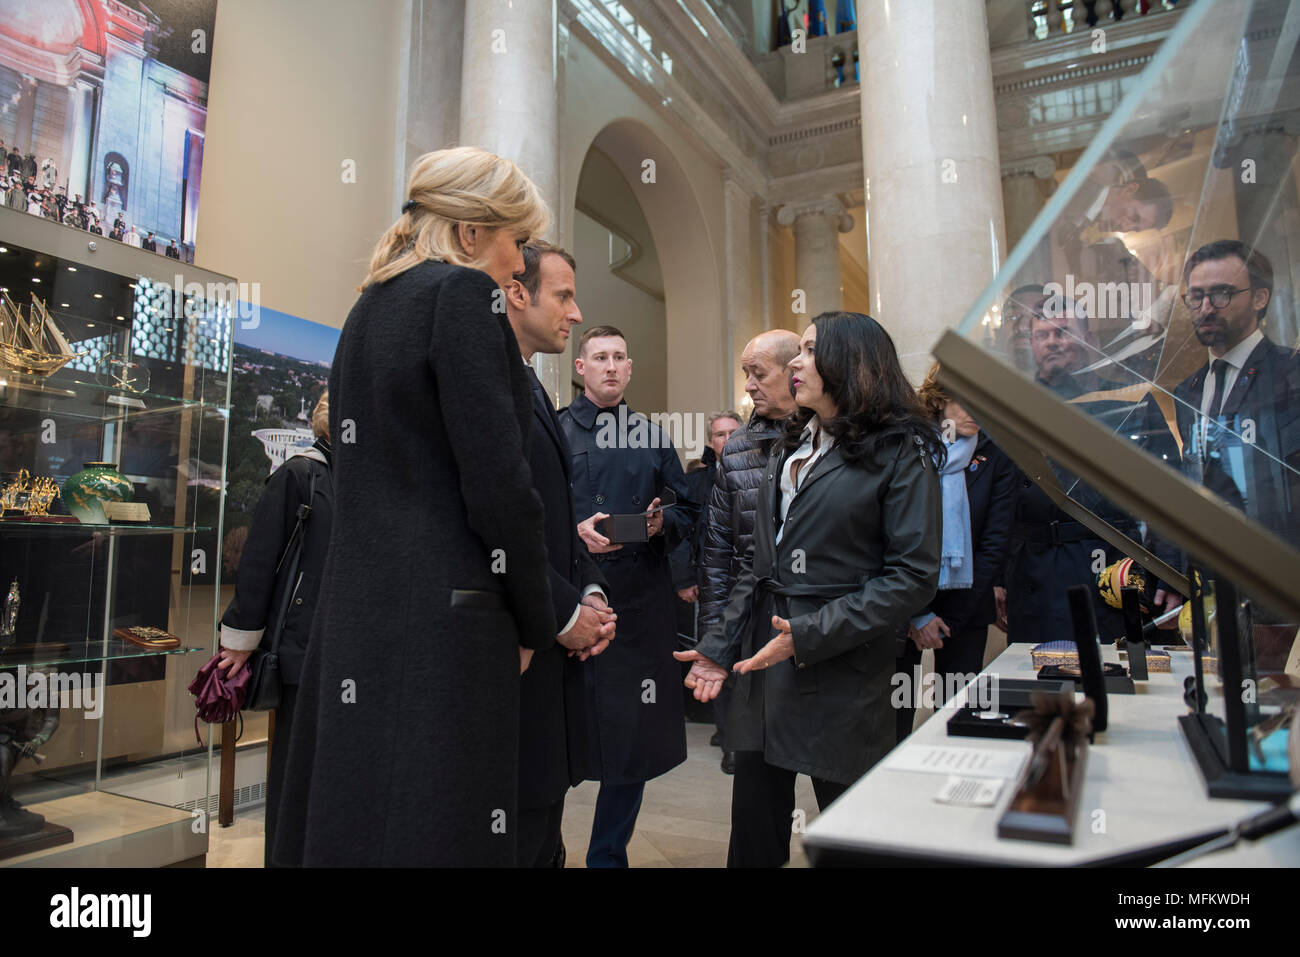 Karen Durham-Aguilera (right), executive director, Army National Military Cemeteries, speaks with French President Emmanuel Macron (center) with his wife, Brigitte Macron (left), after receiving a tour from of the Memorial Amphitheater Display Room at Arlington National Cemetery, Arlington, Virginia, April 24, 2018.  Macron’s visit to Arlington National Cemetery was part of the first official State Visit from France since President Francois Hollande came to Washington in 2014. The French President along with his wife also visited the gravesite of former President John F. Kennedy. (U.S. Army ph Stock Photo